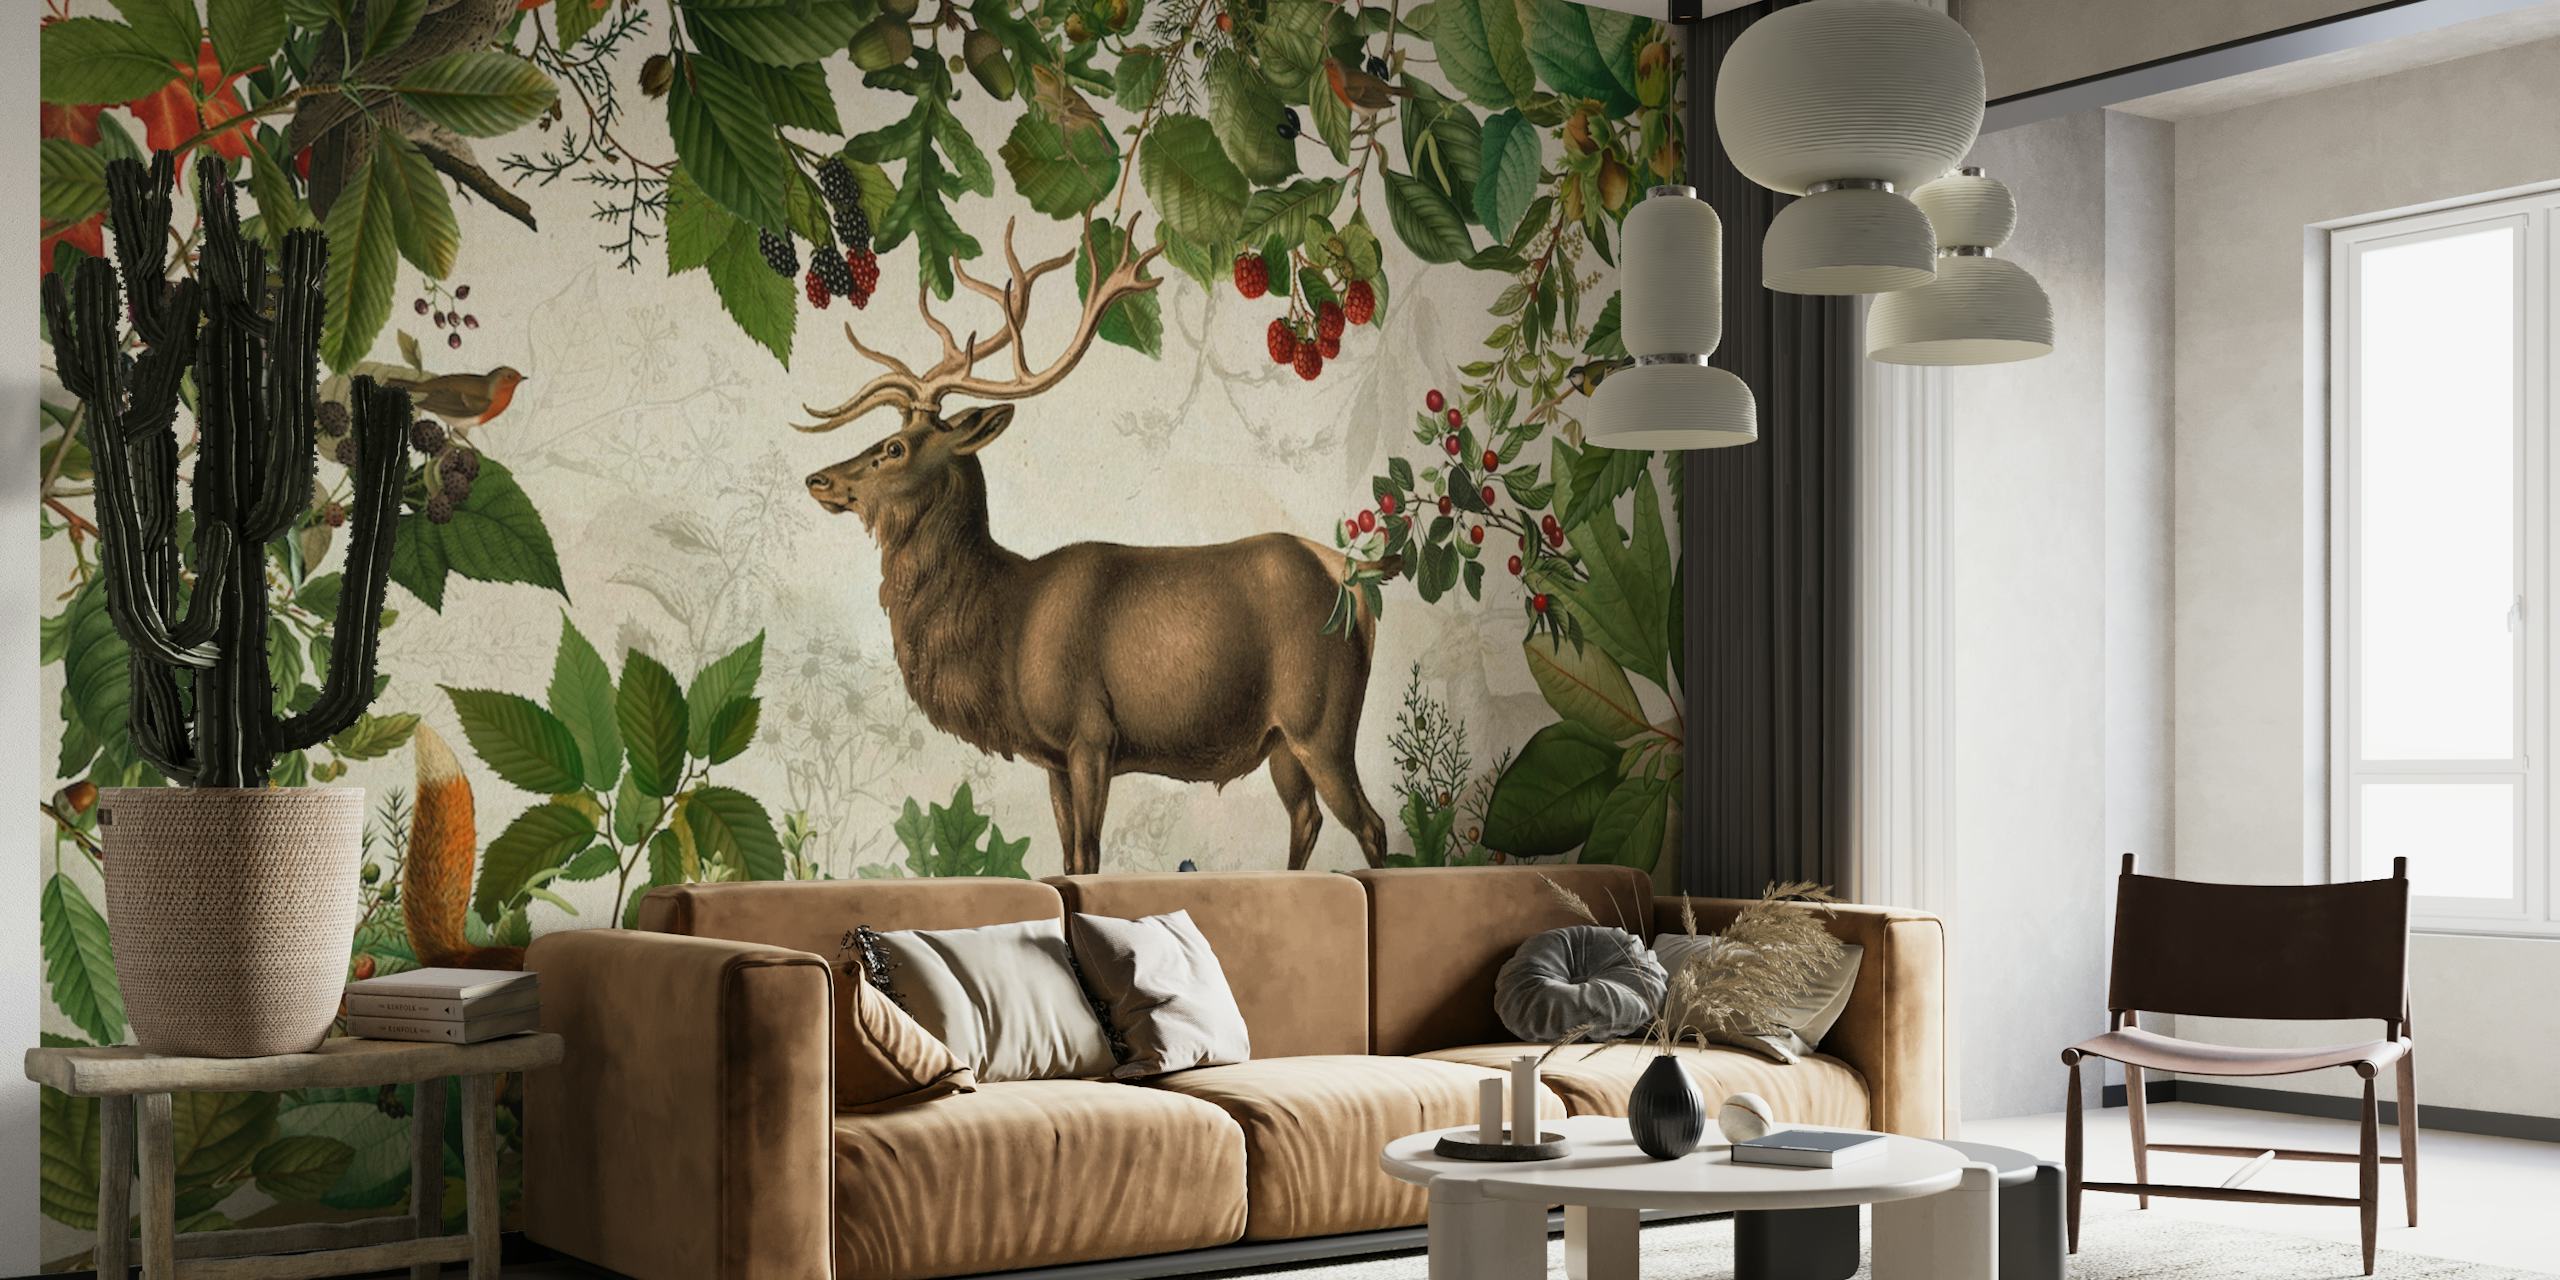 Autumn forest wall mural with a majestic stag surrounded by lush foliage and berries